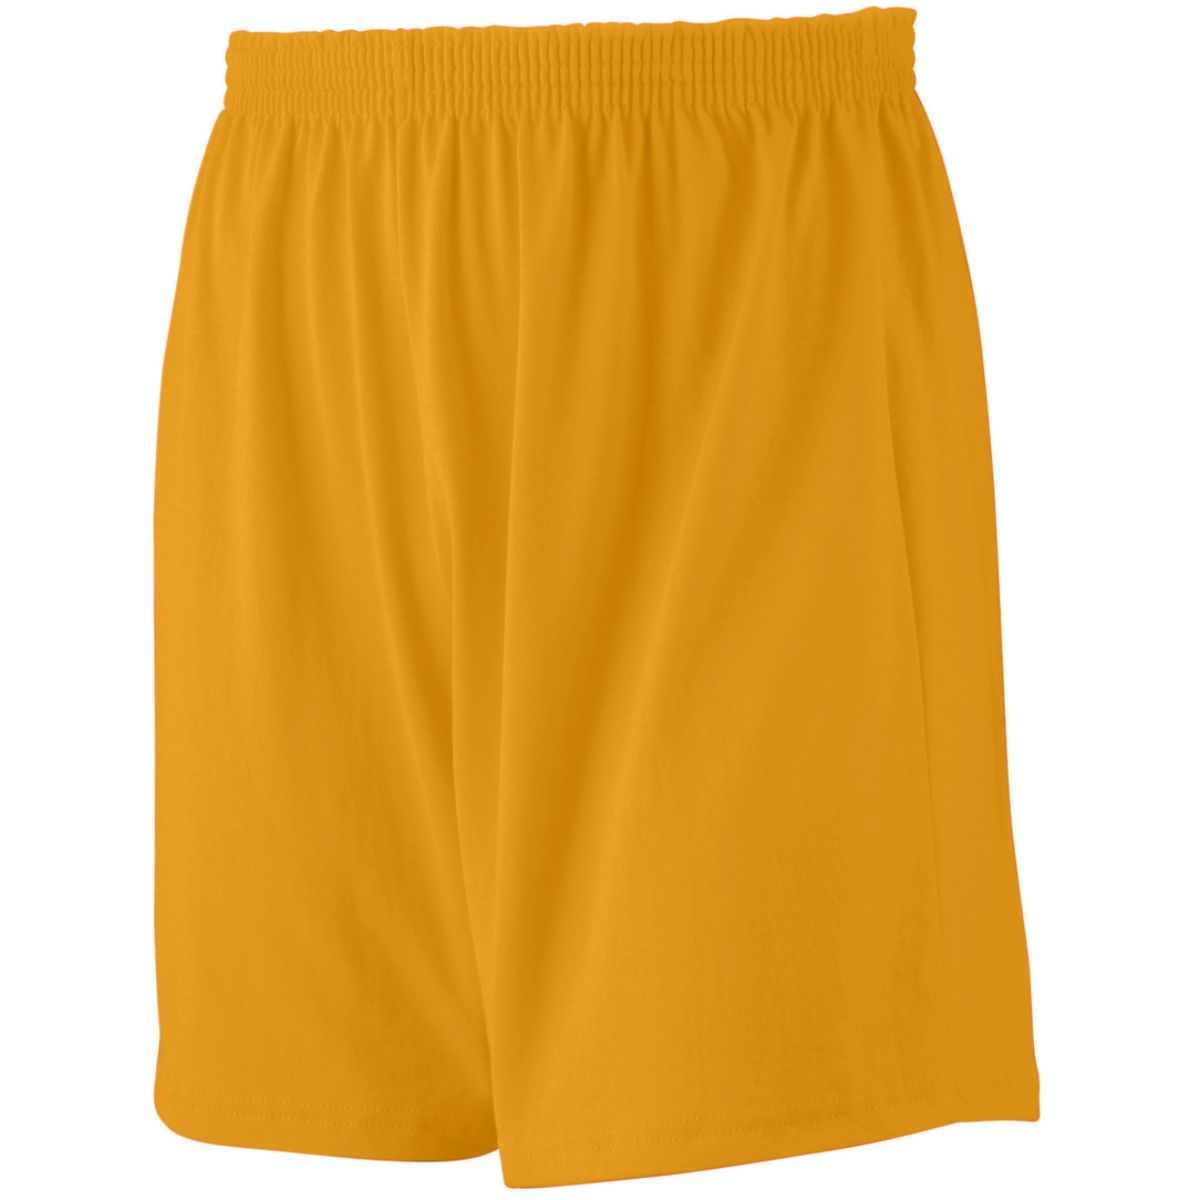 Augusta Sportswear Youth Jersey Knit Shorts in Gold  -Part of the Youth, Youth-Shorts, Augusta-Products product lines at KanaleyCreations.com